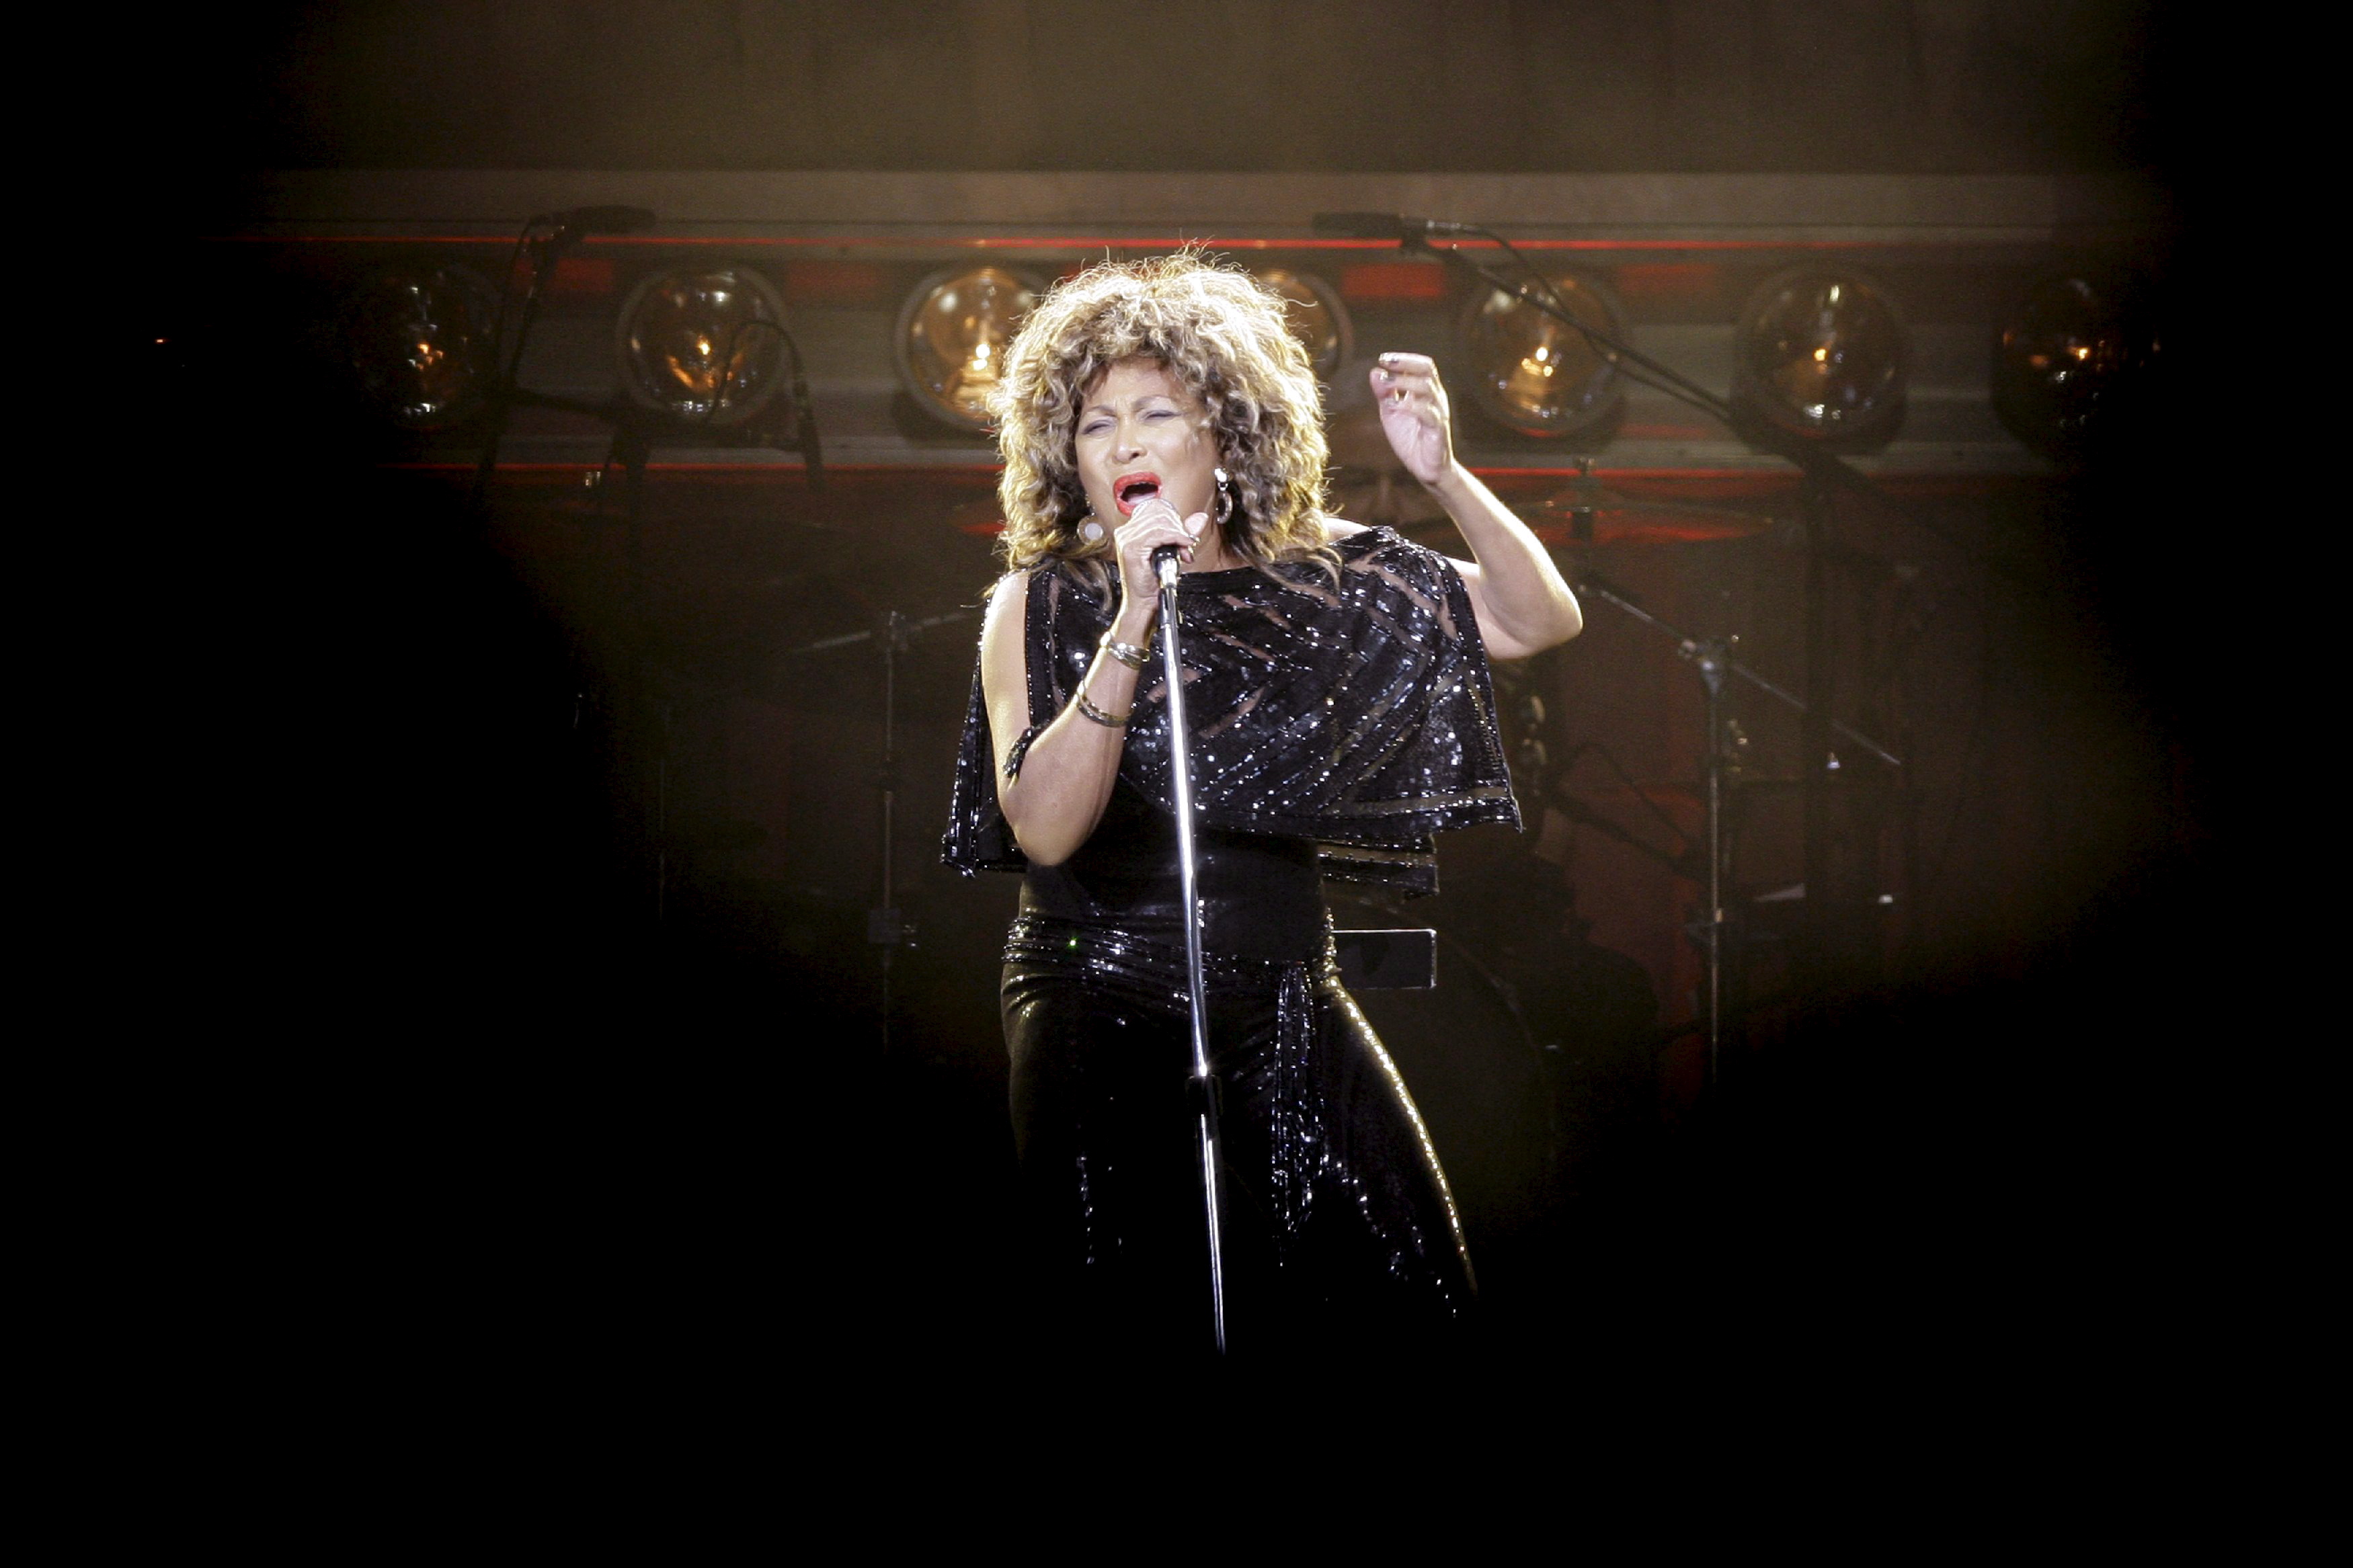 US singer Tina Turner performs on stage at the O2 World in Berlin during her concert, late 26 January 2009. EPA/BRITTA PEDERSEN